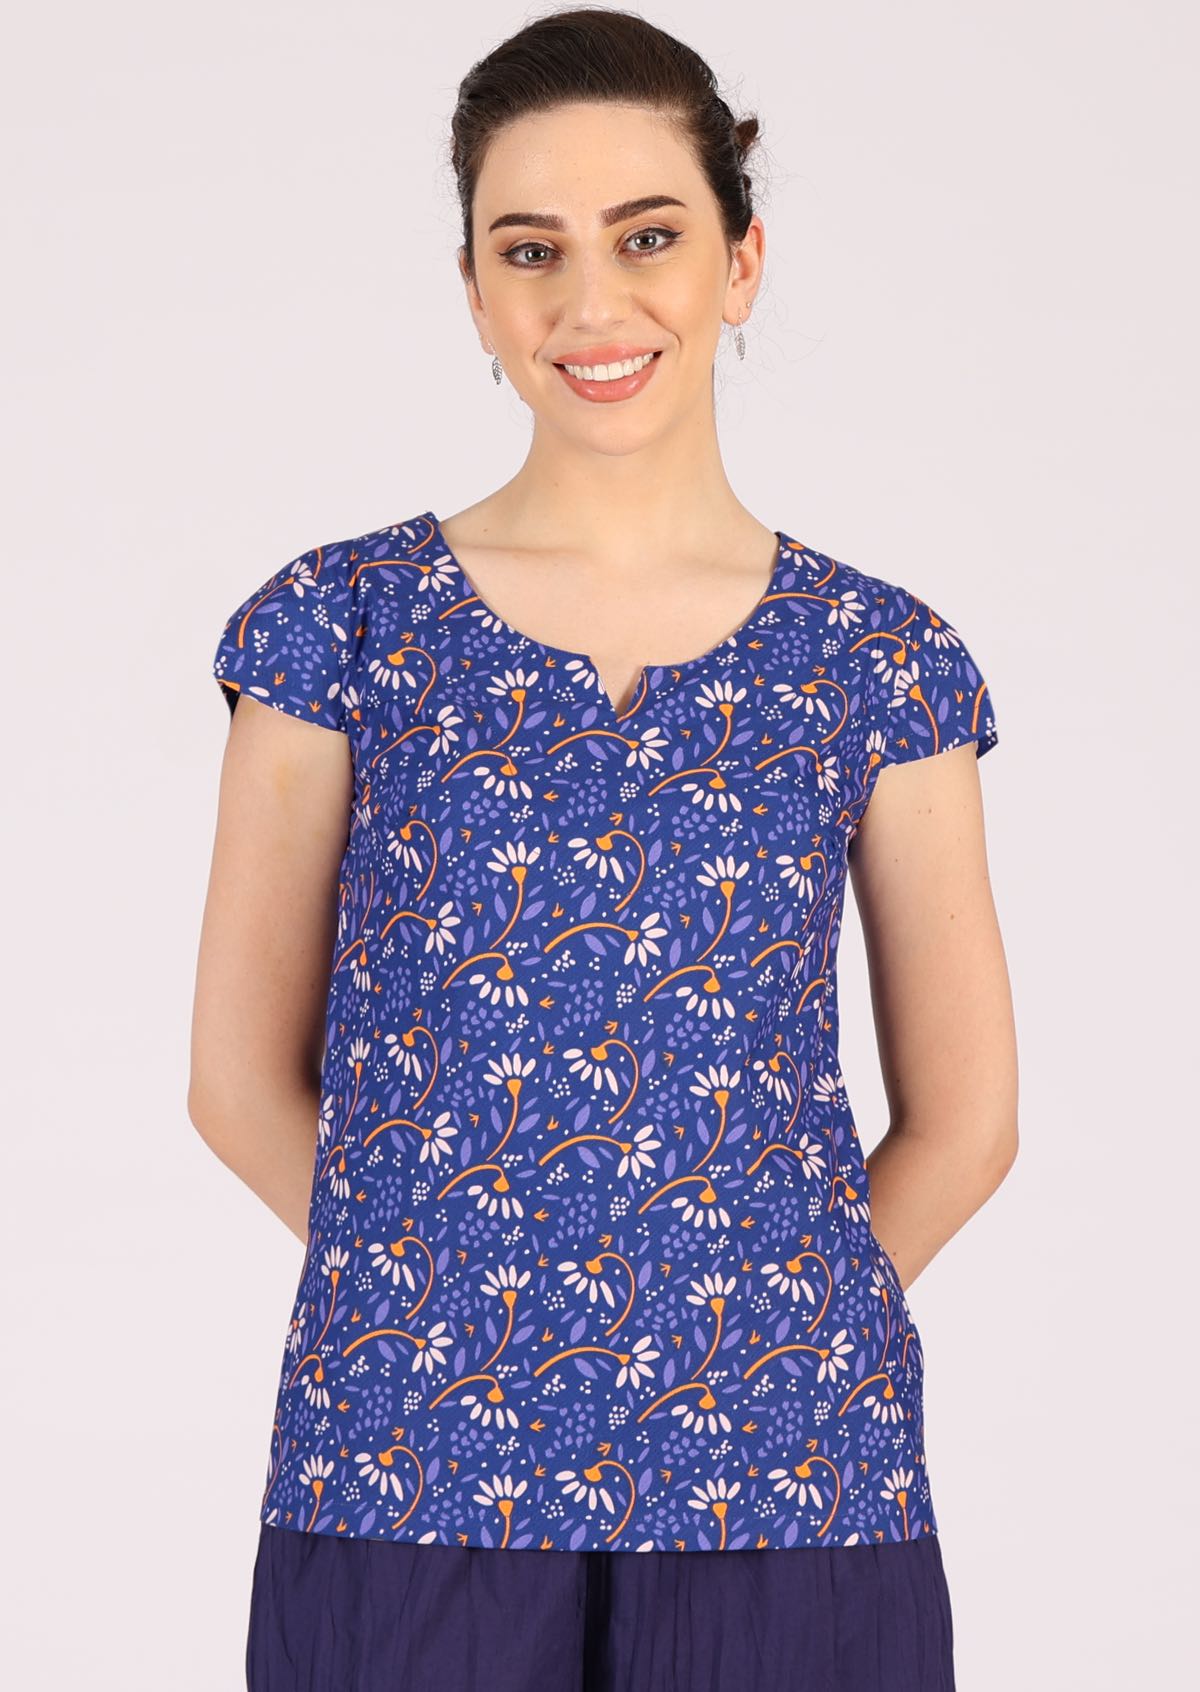 Model wears 100% cotton top in blue with short sleeves that falls below the hip.